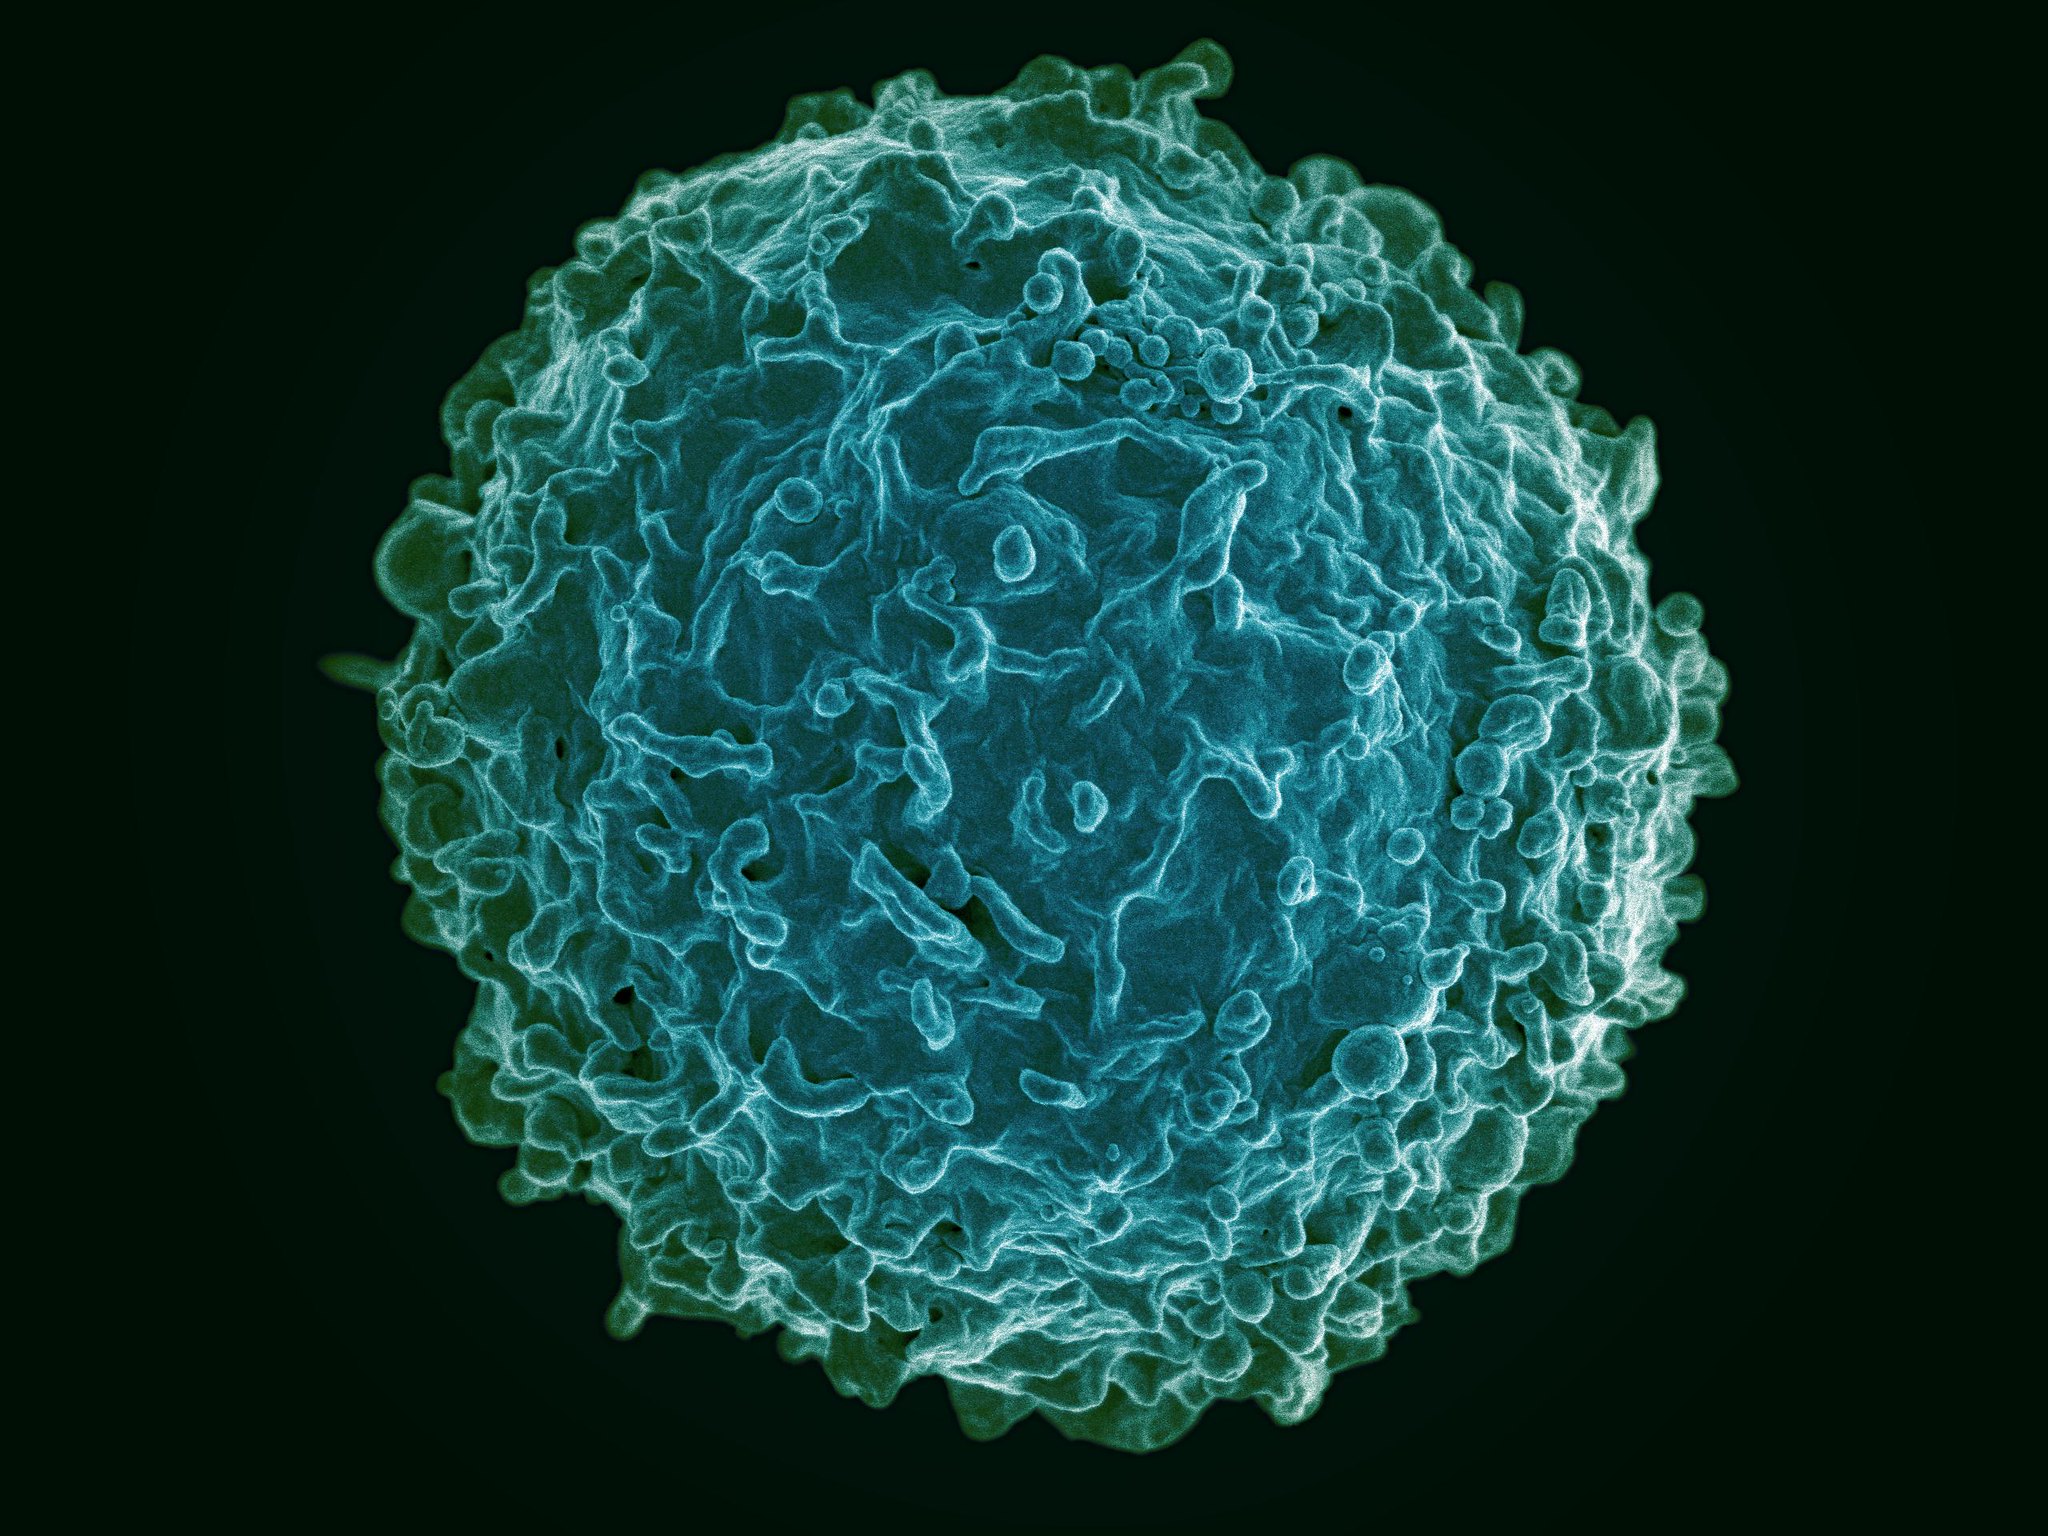 Colorized scanning electron micrograph of a B cell